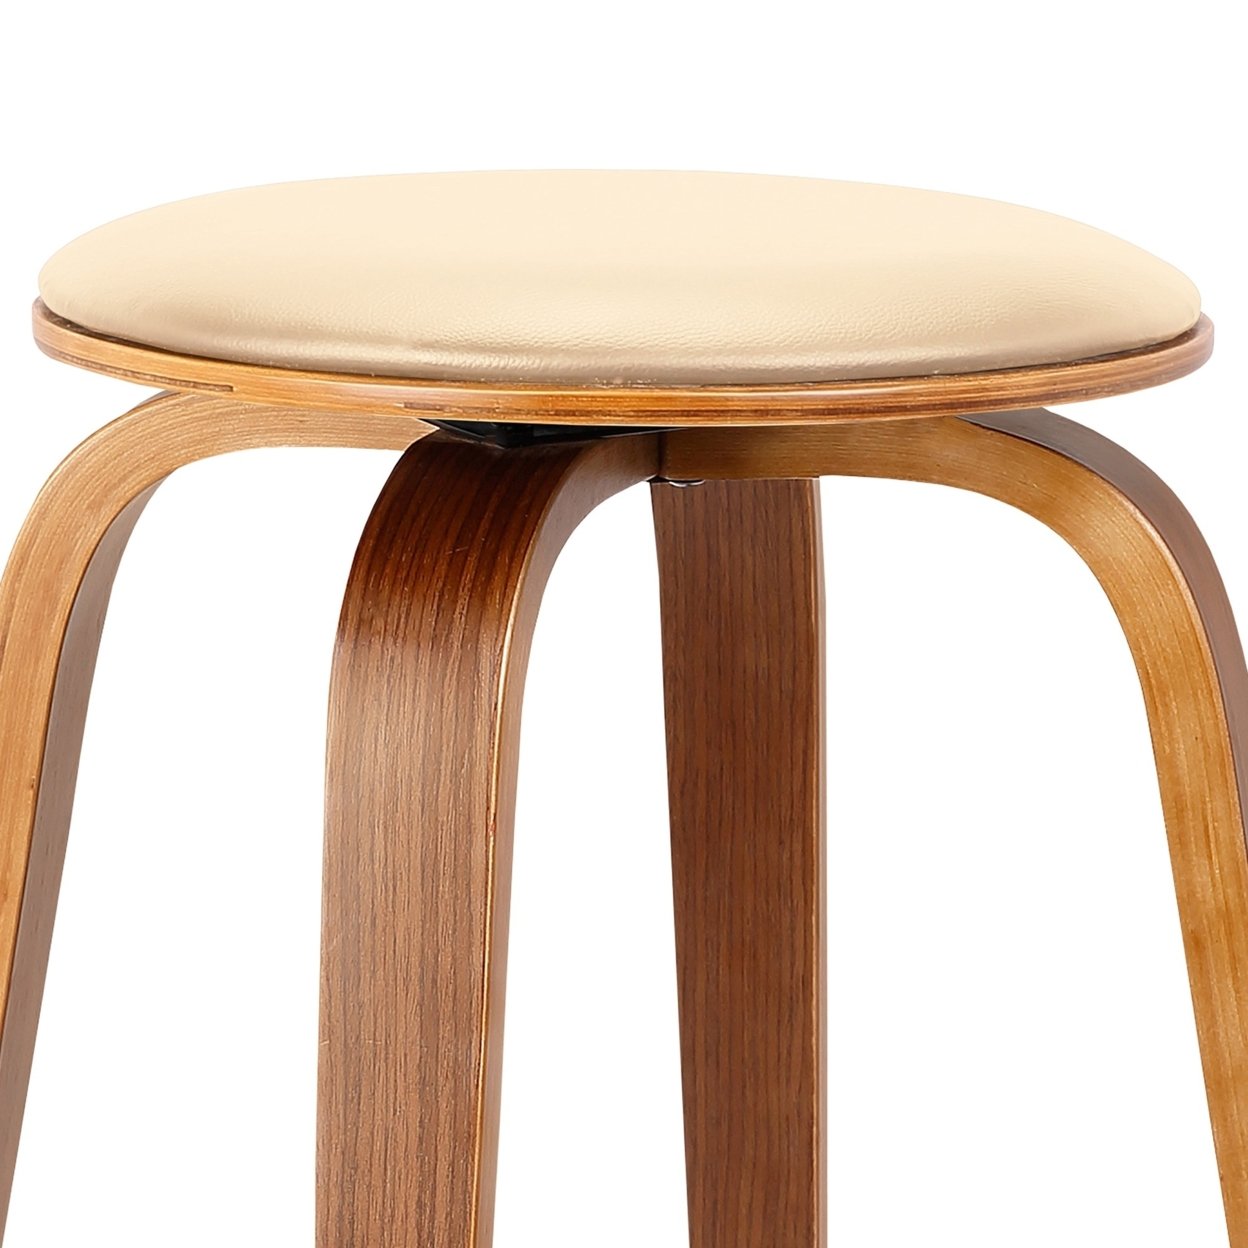 Round Leatherette Wooden Counter Stool With Flared Legs, Brown And Cream- Saltoro Sherpi